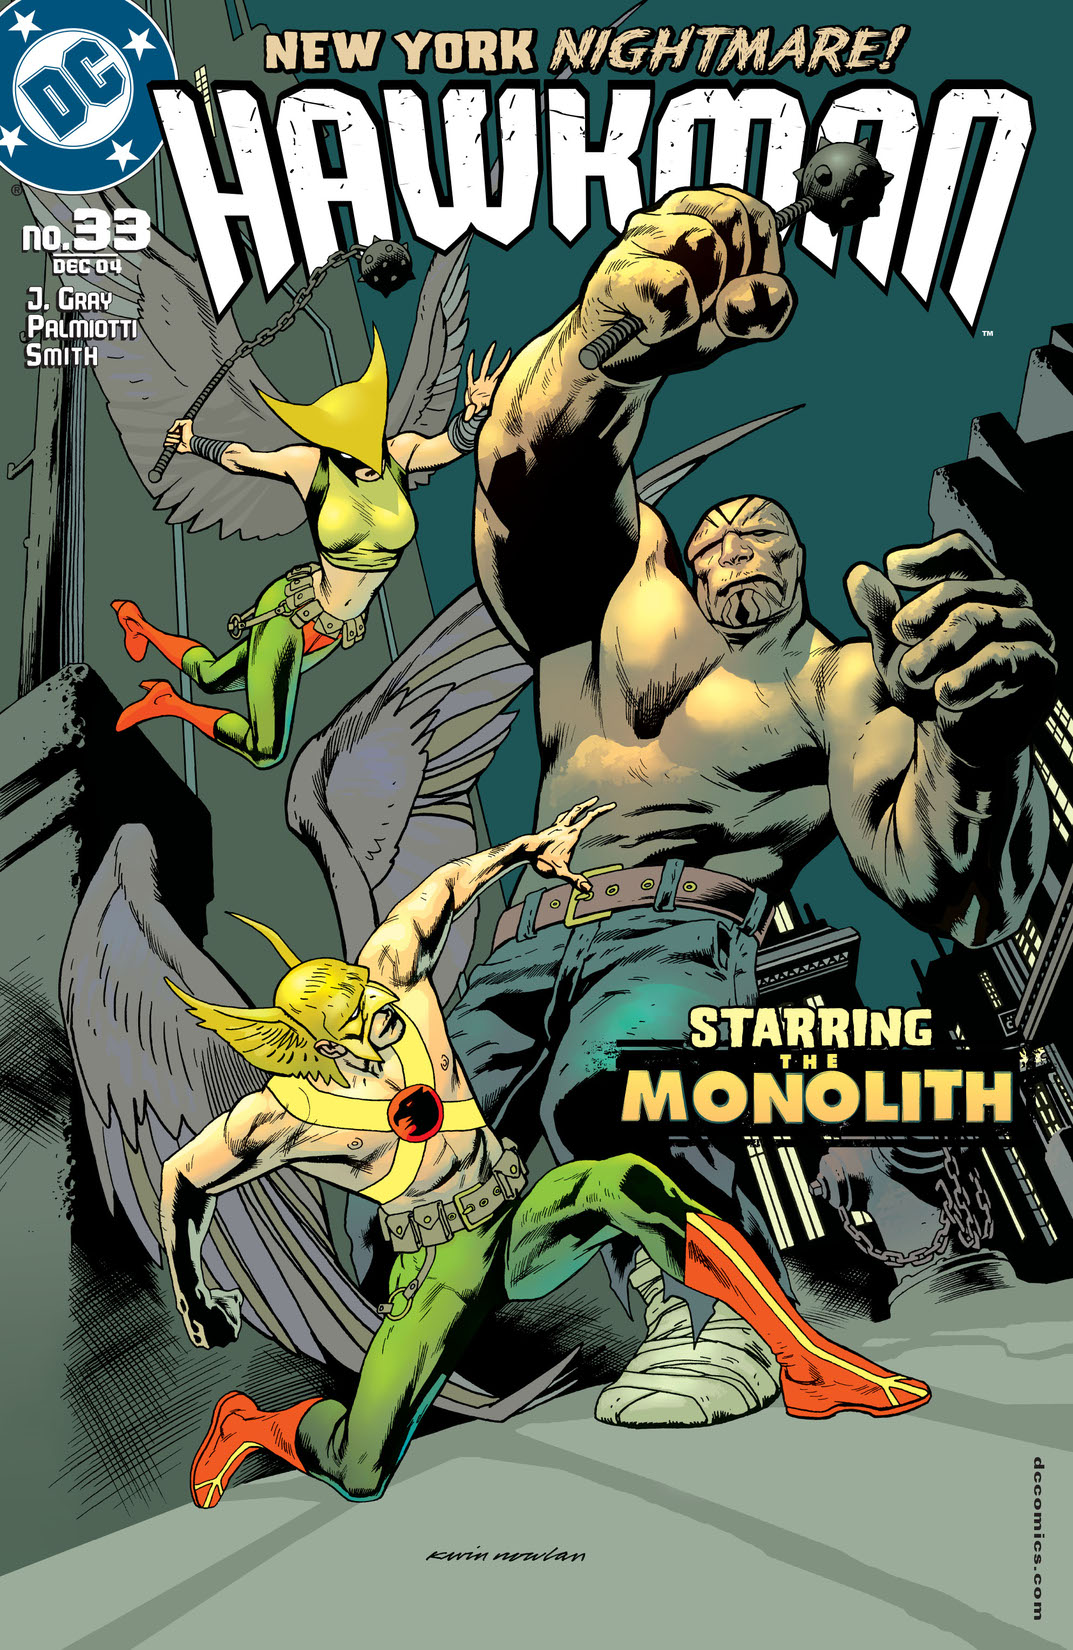 Hawkman (2002-) #33 preview images